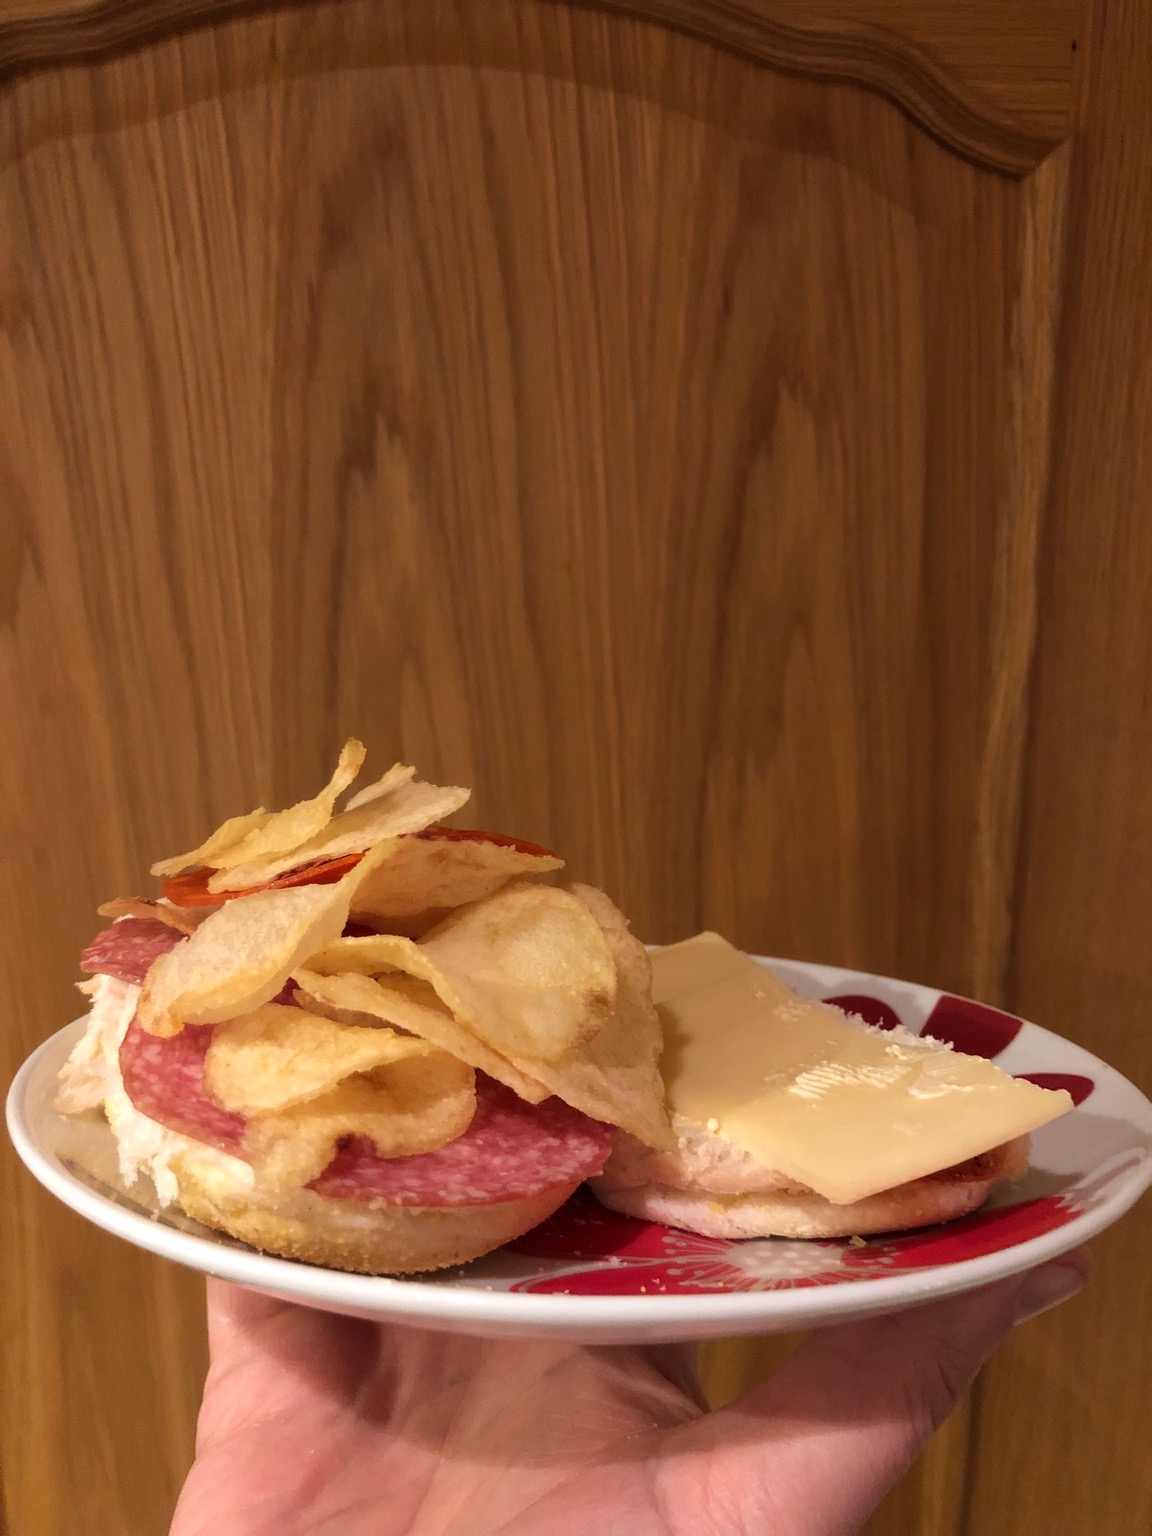 Crisps, cheese and salami on an open roll